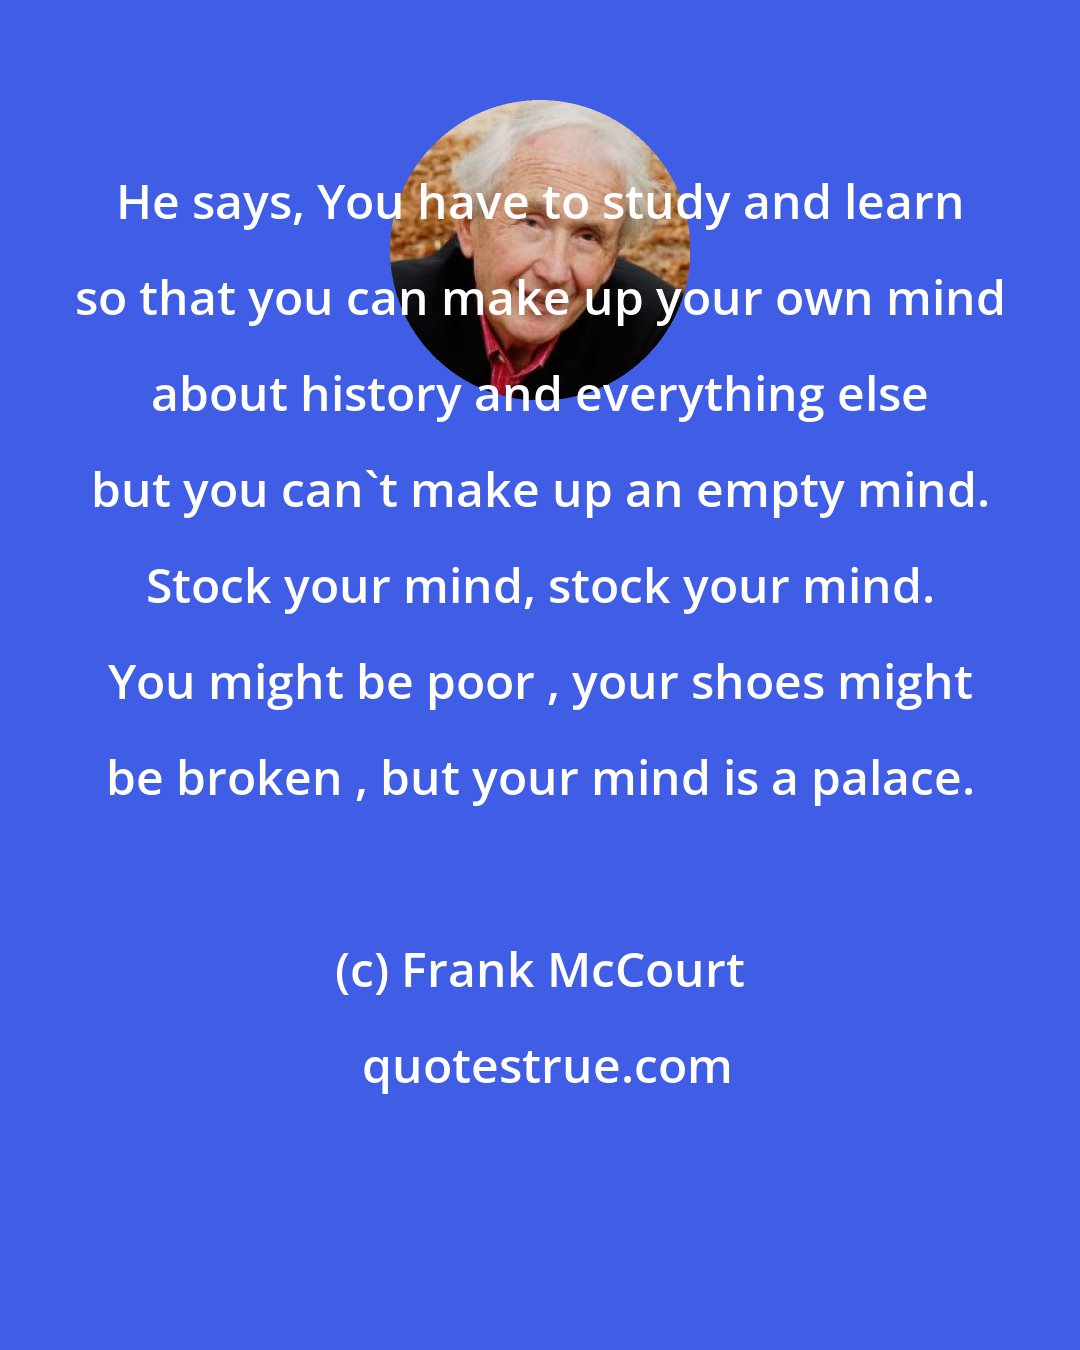 Frank McCourt: He says, You have to study and learn so that you can make up your own mind about history and everything else but you can't make up an empty mind. Stock your mind, stock your mind. You might be poor , your shoes might be broken , but your mind is a palace.